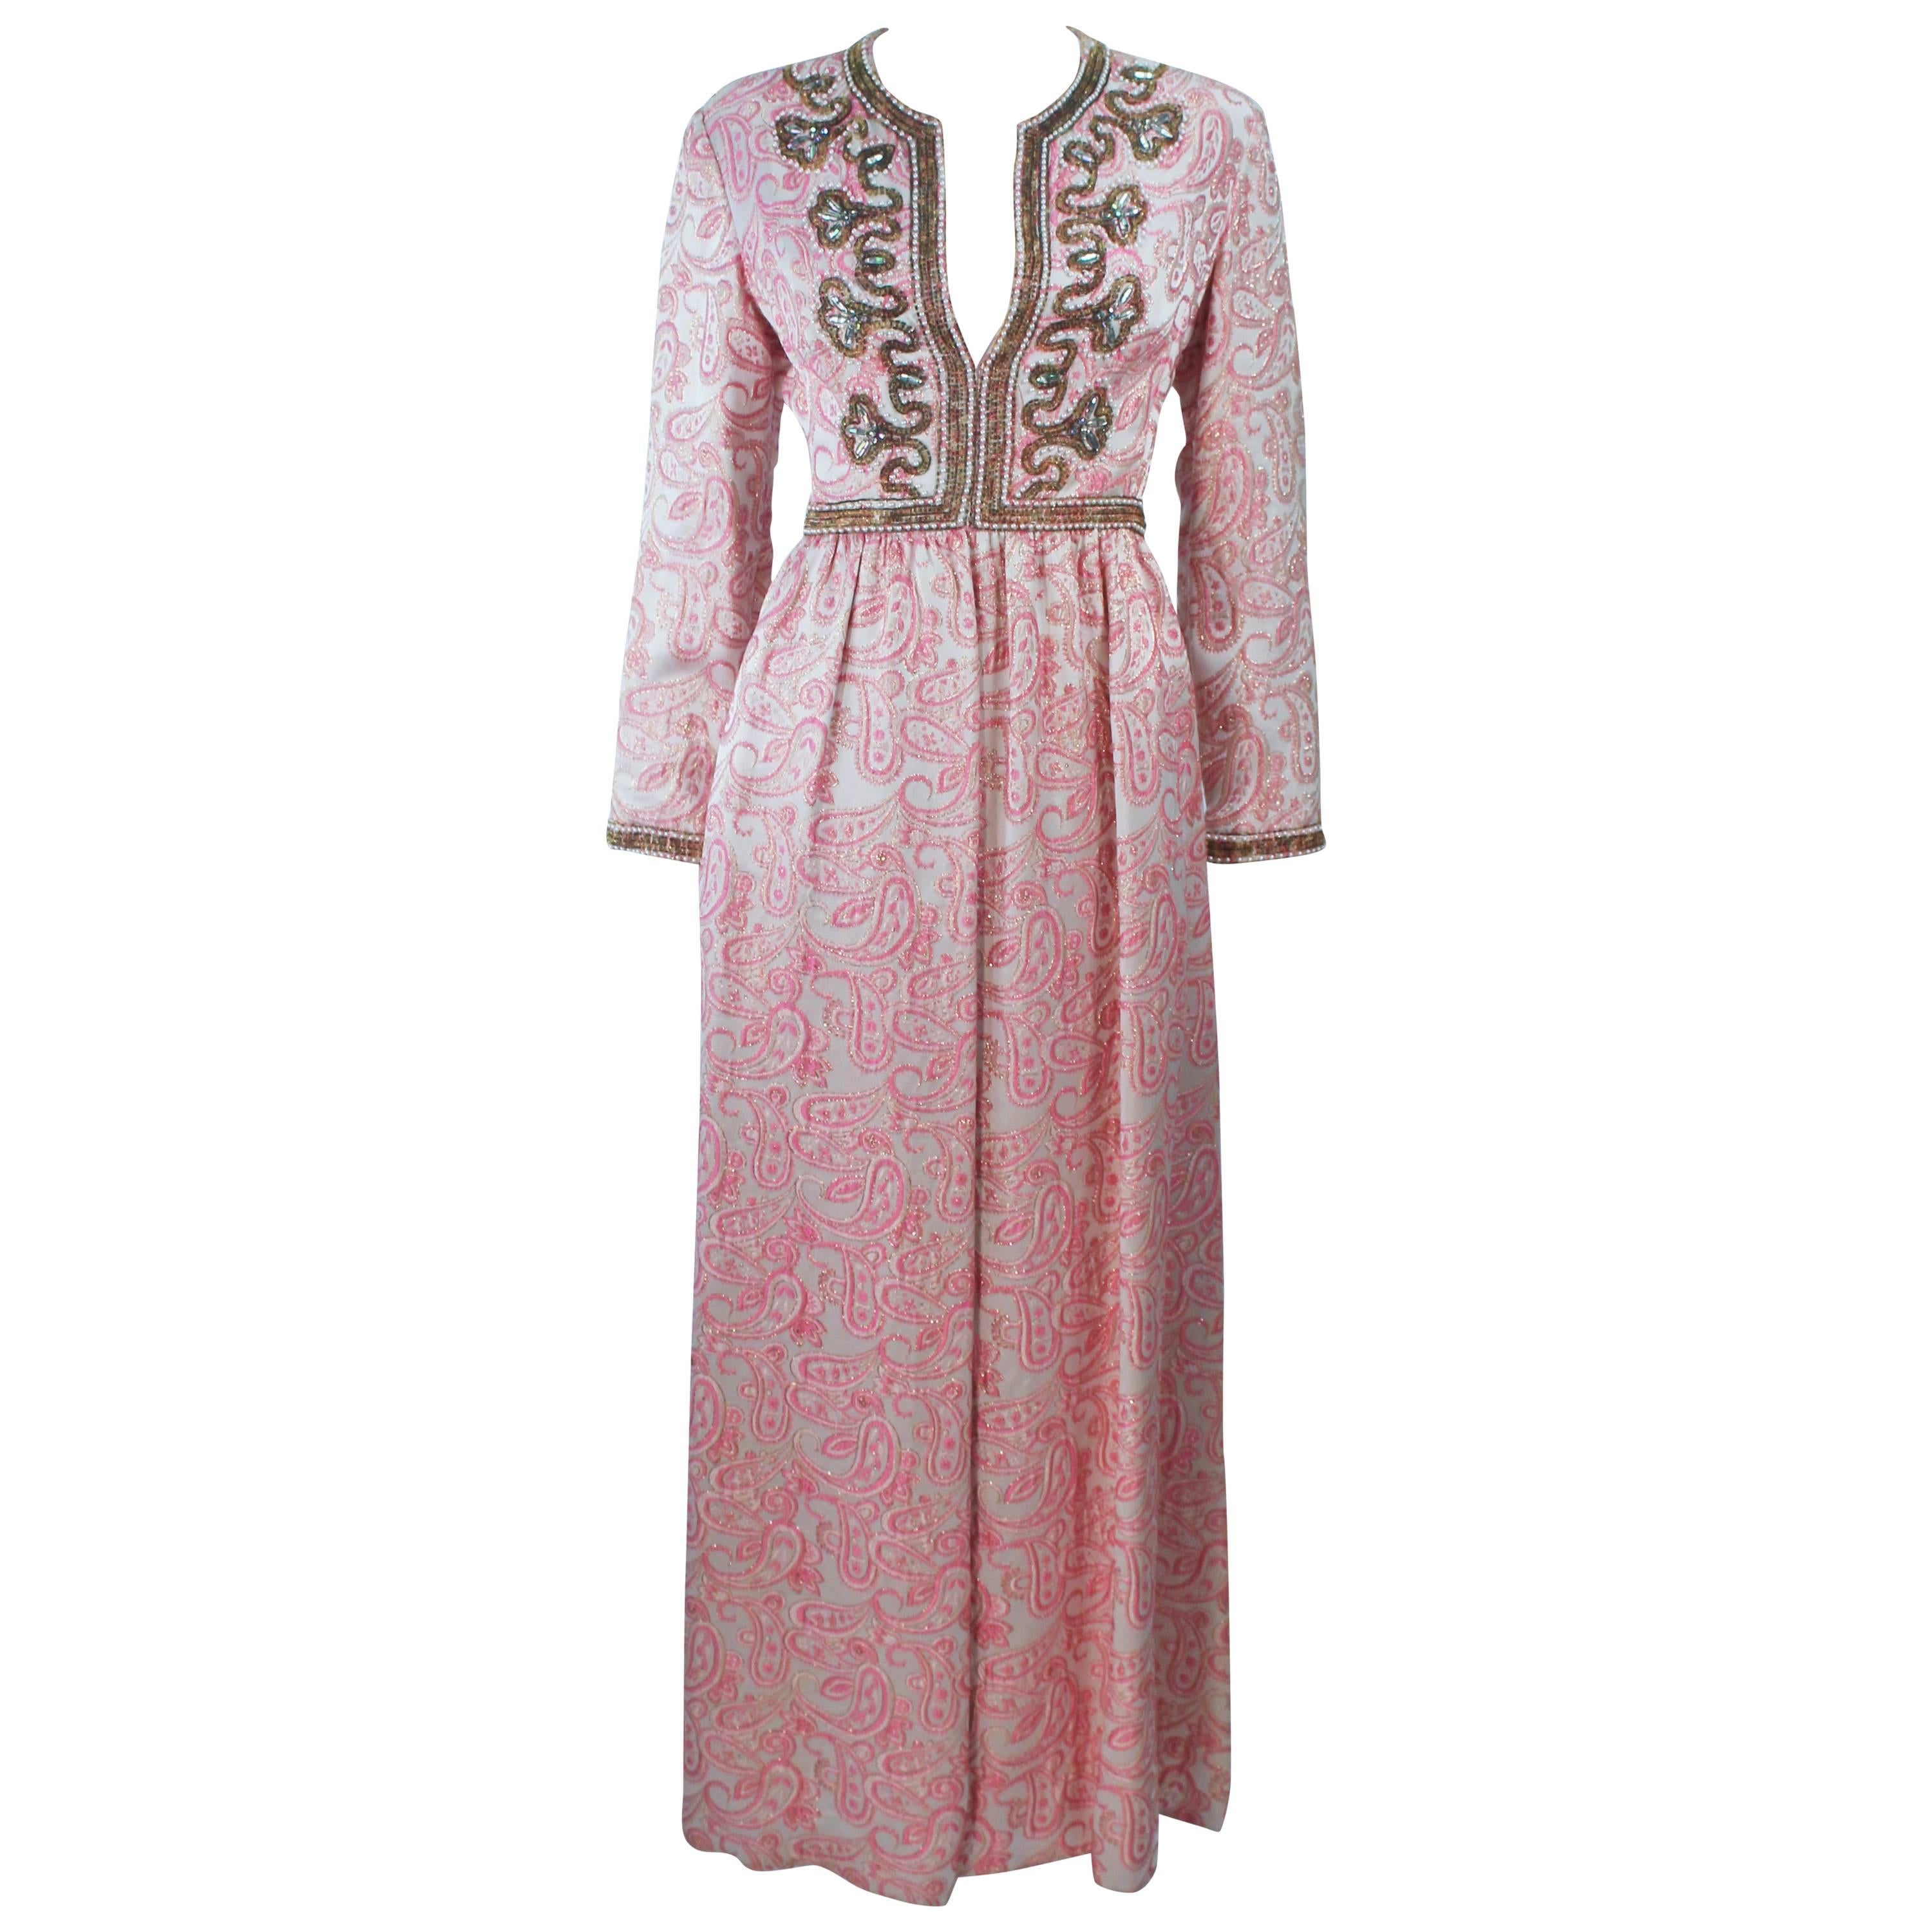 CEIL CHAPMAN 1960's Pink Paisley Brocade Gown with Beaded Applique Size 6 8